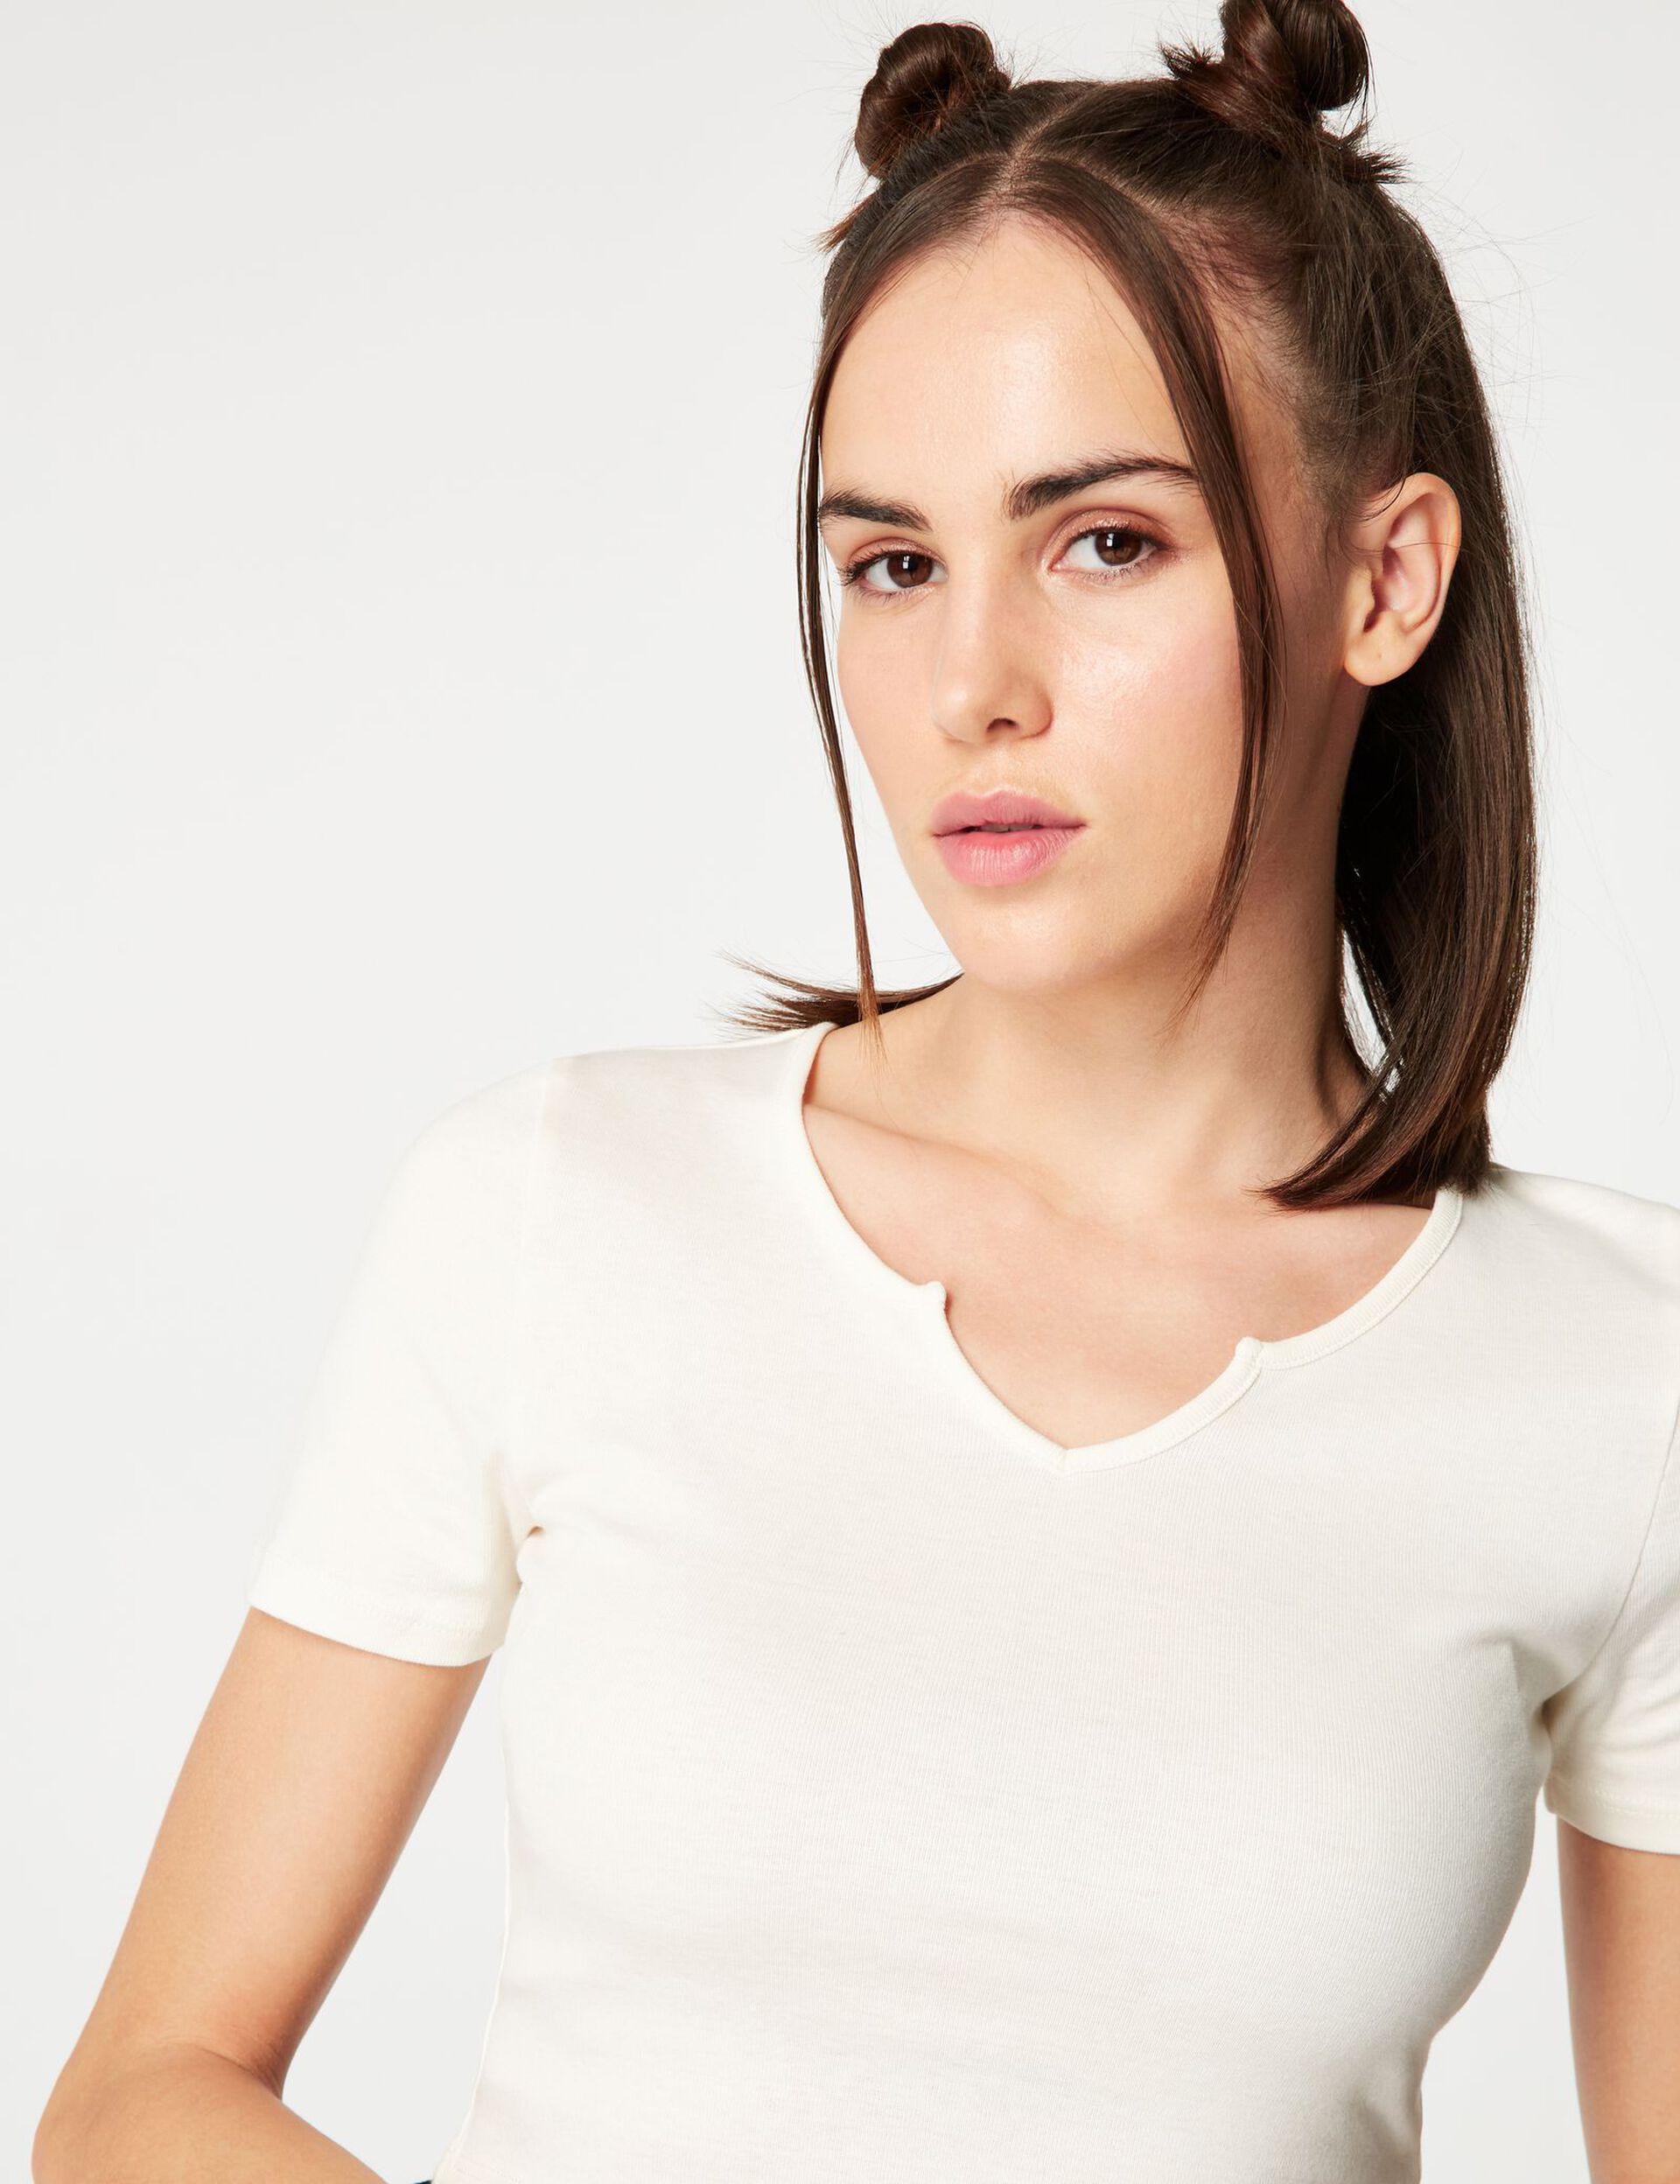 Fitted cropped T-shirt